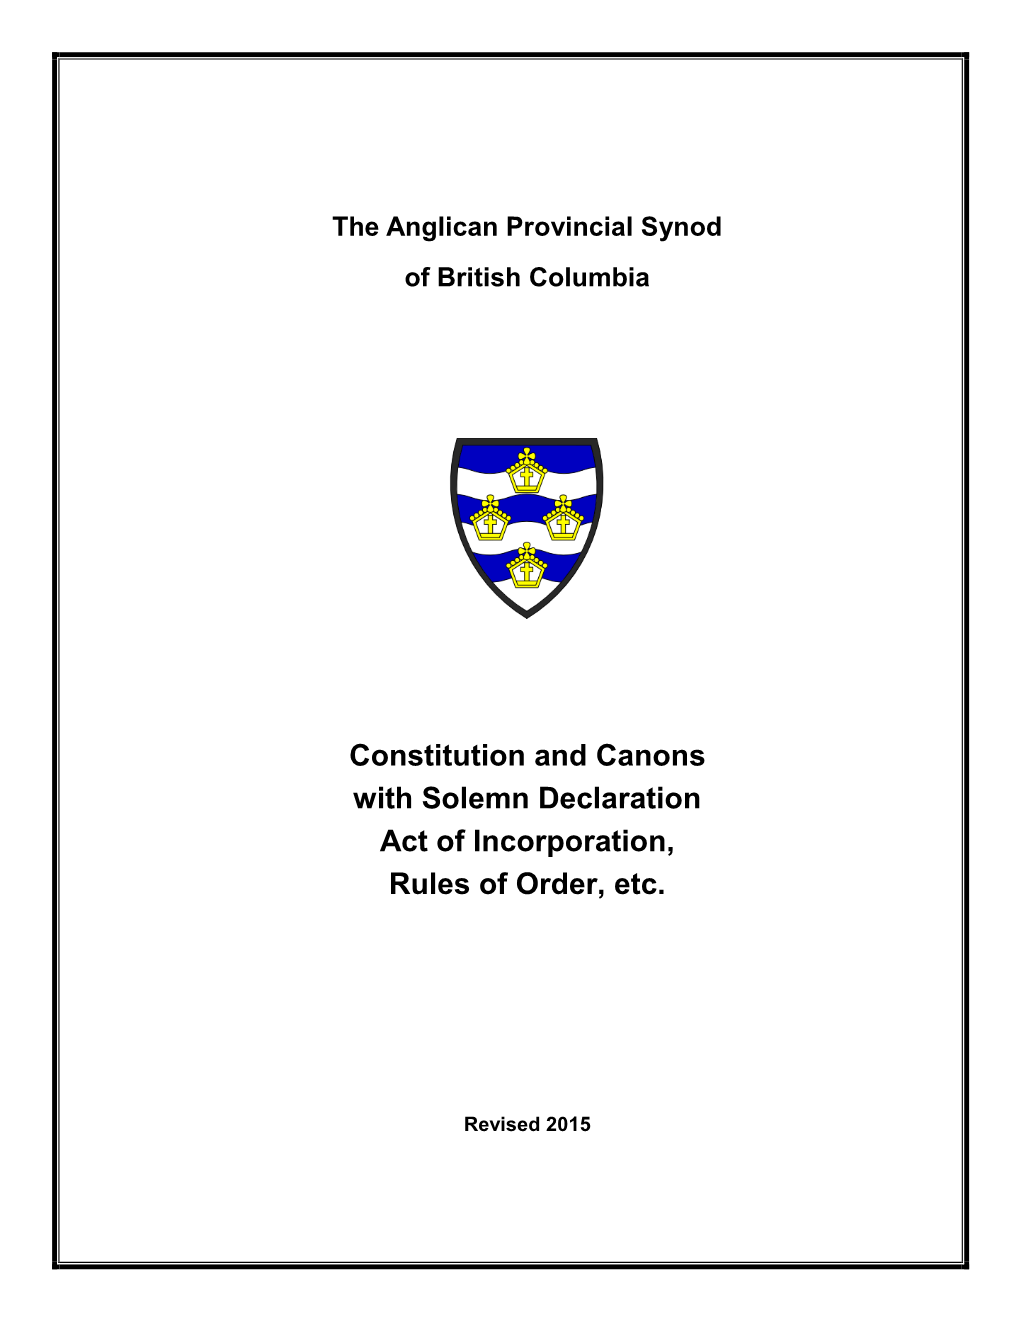 The Anglican Provincial Synod of British Columbia